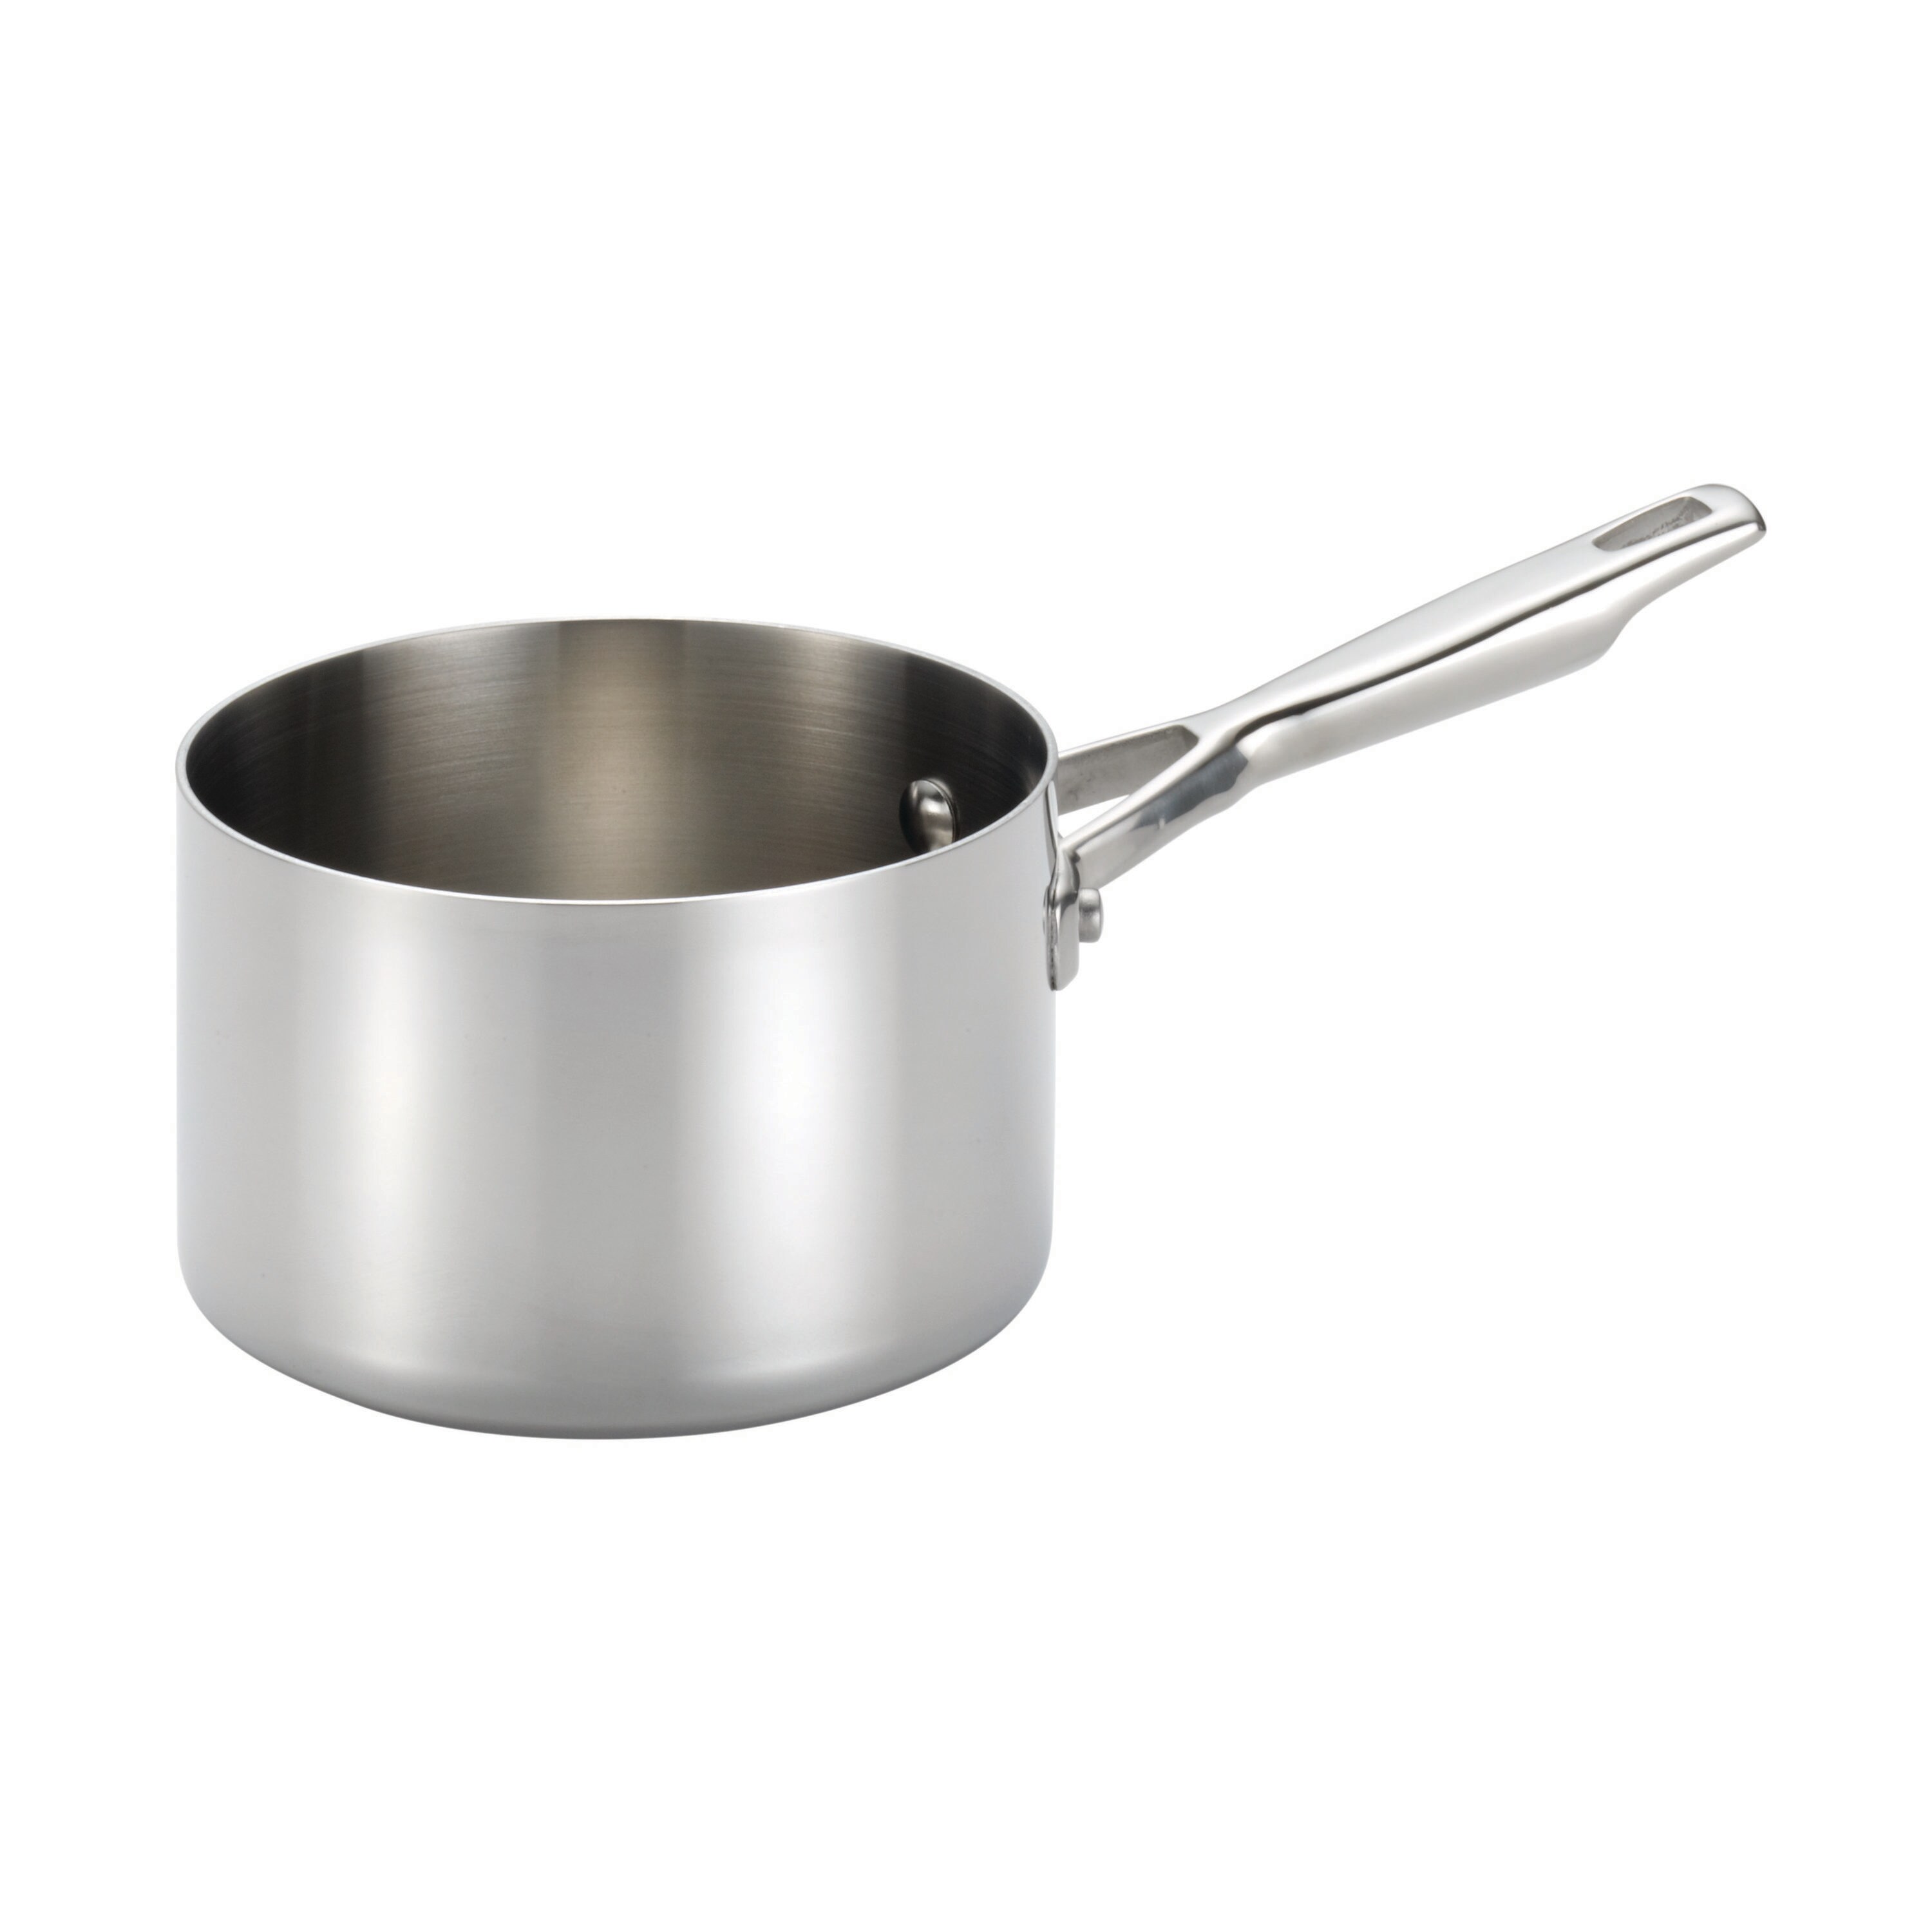 Anolon Tri-Ply Clad Stainless Steel Roaster with Nonstick Rack, Dillard's